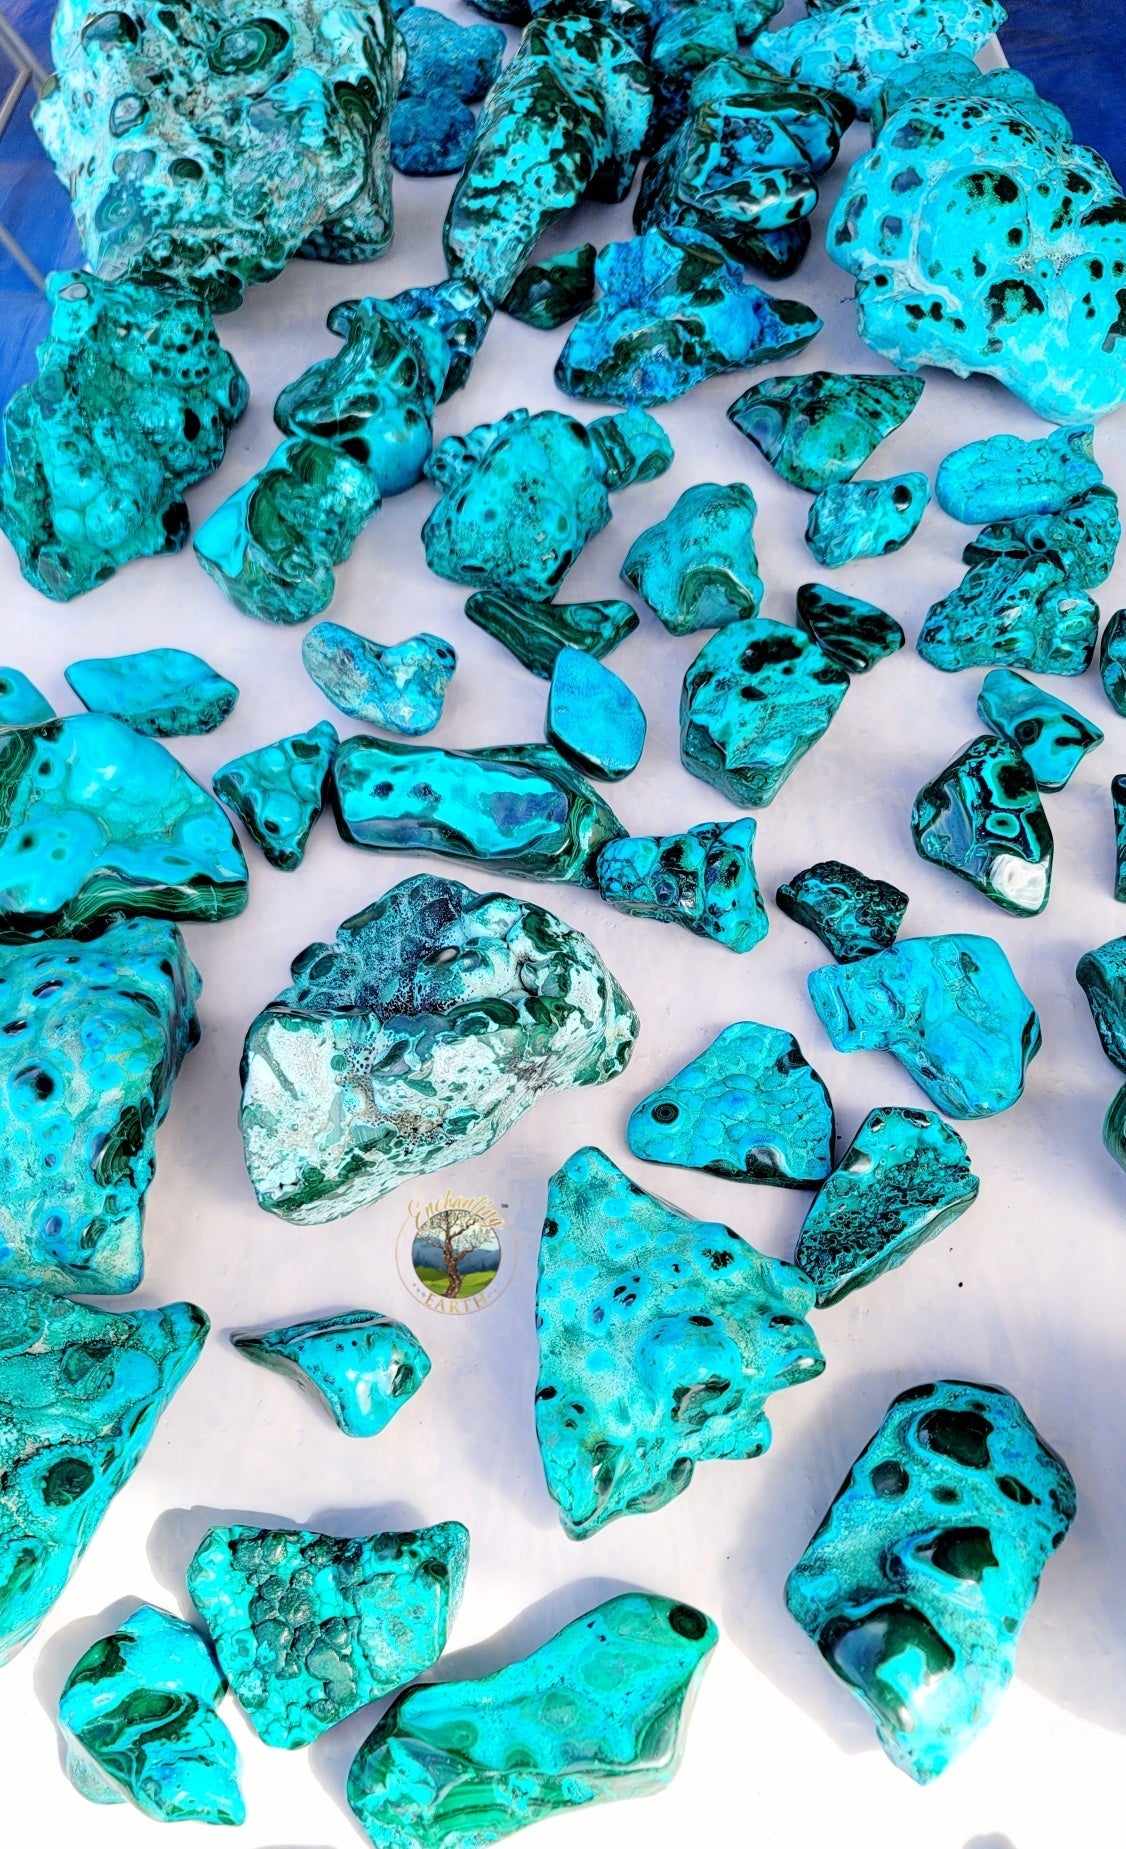 Chrysocolla Meaning and Healing Properties